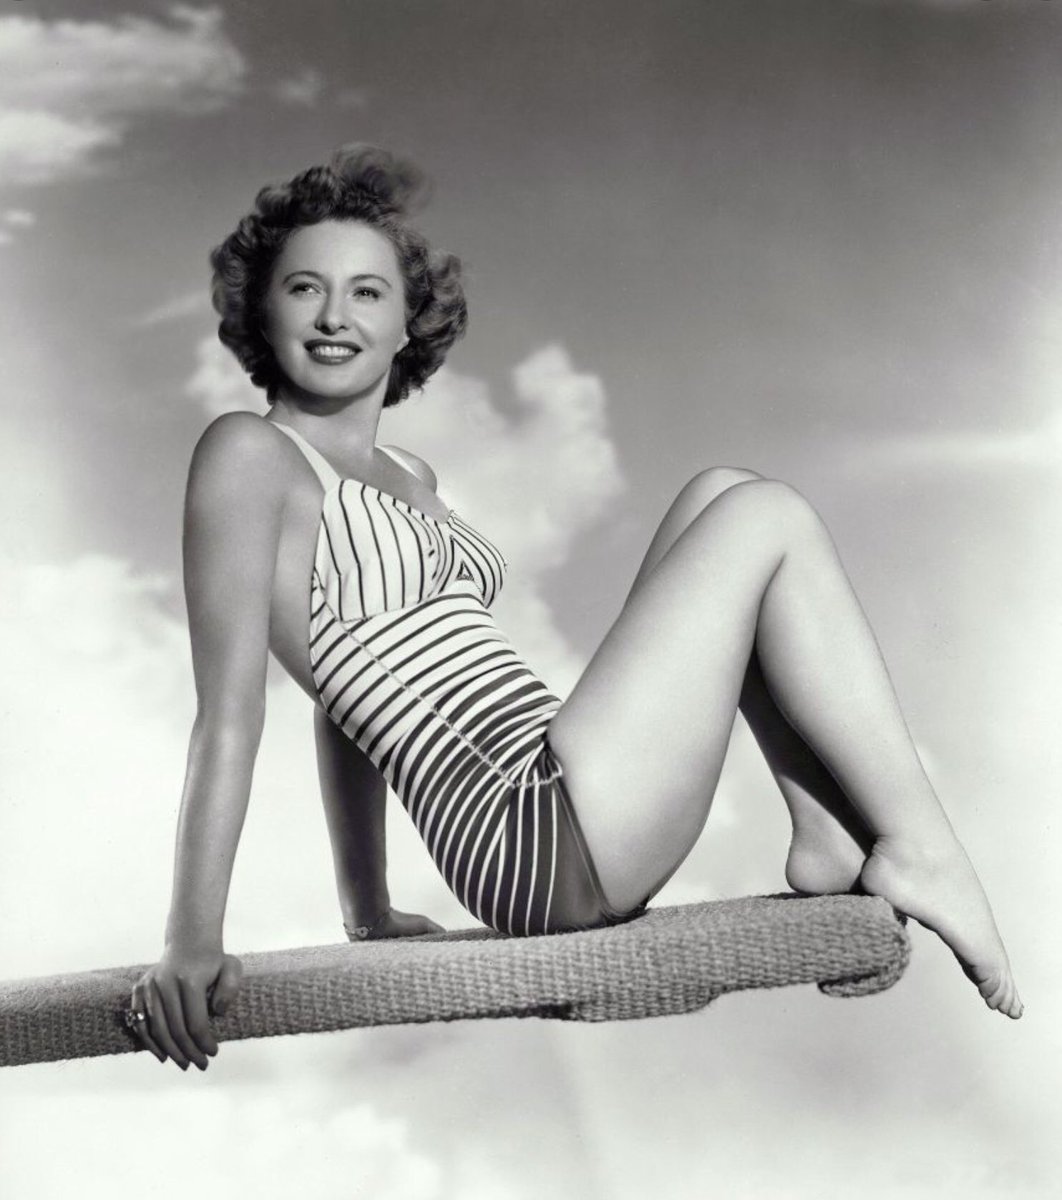 So is anybody in someplace nice and warm, like Barbara Stanwyck here? 